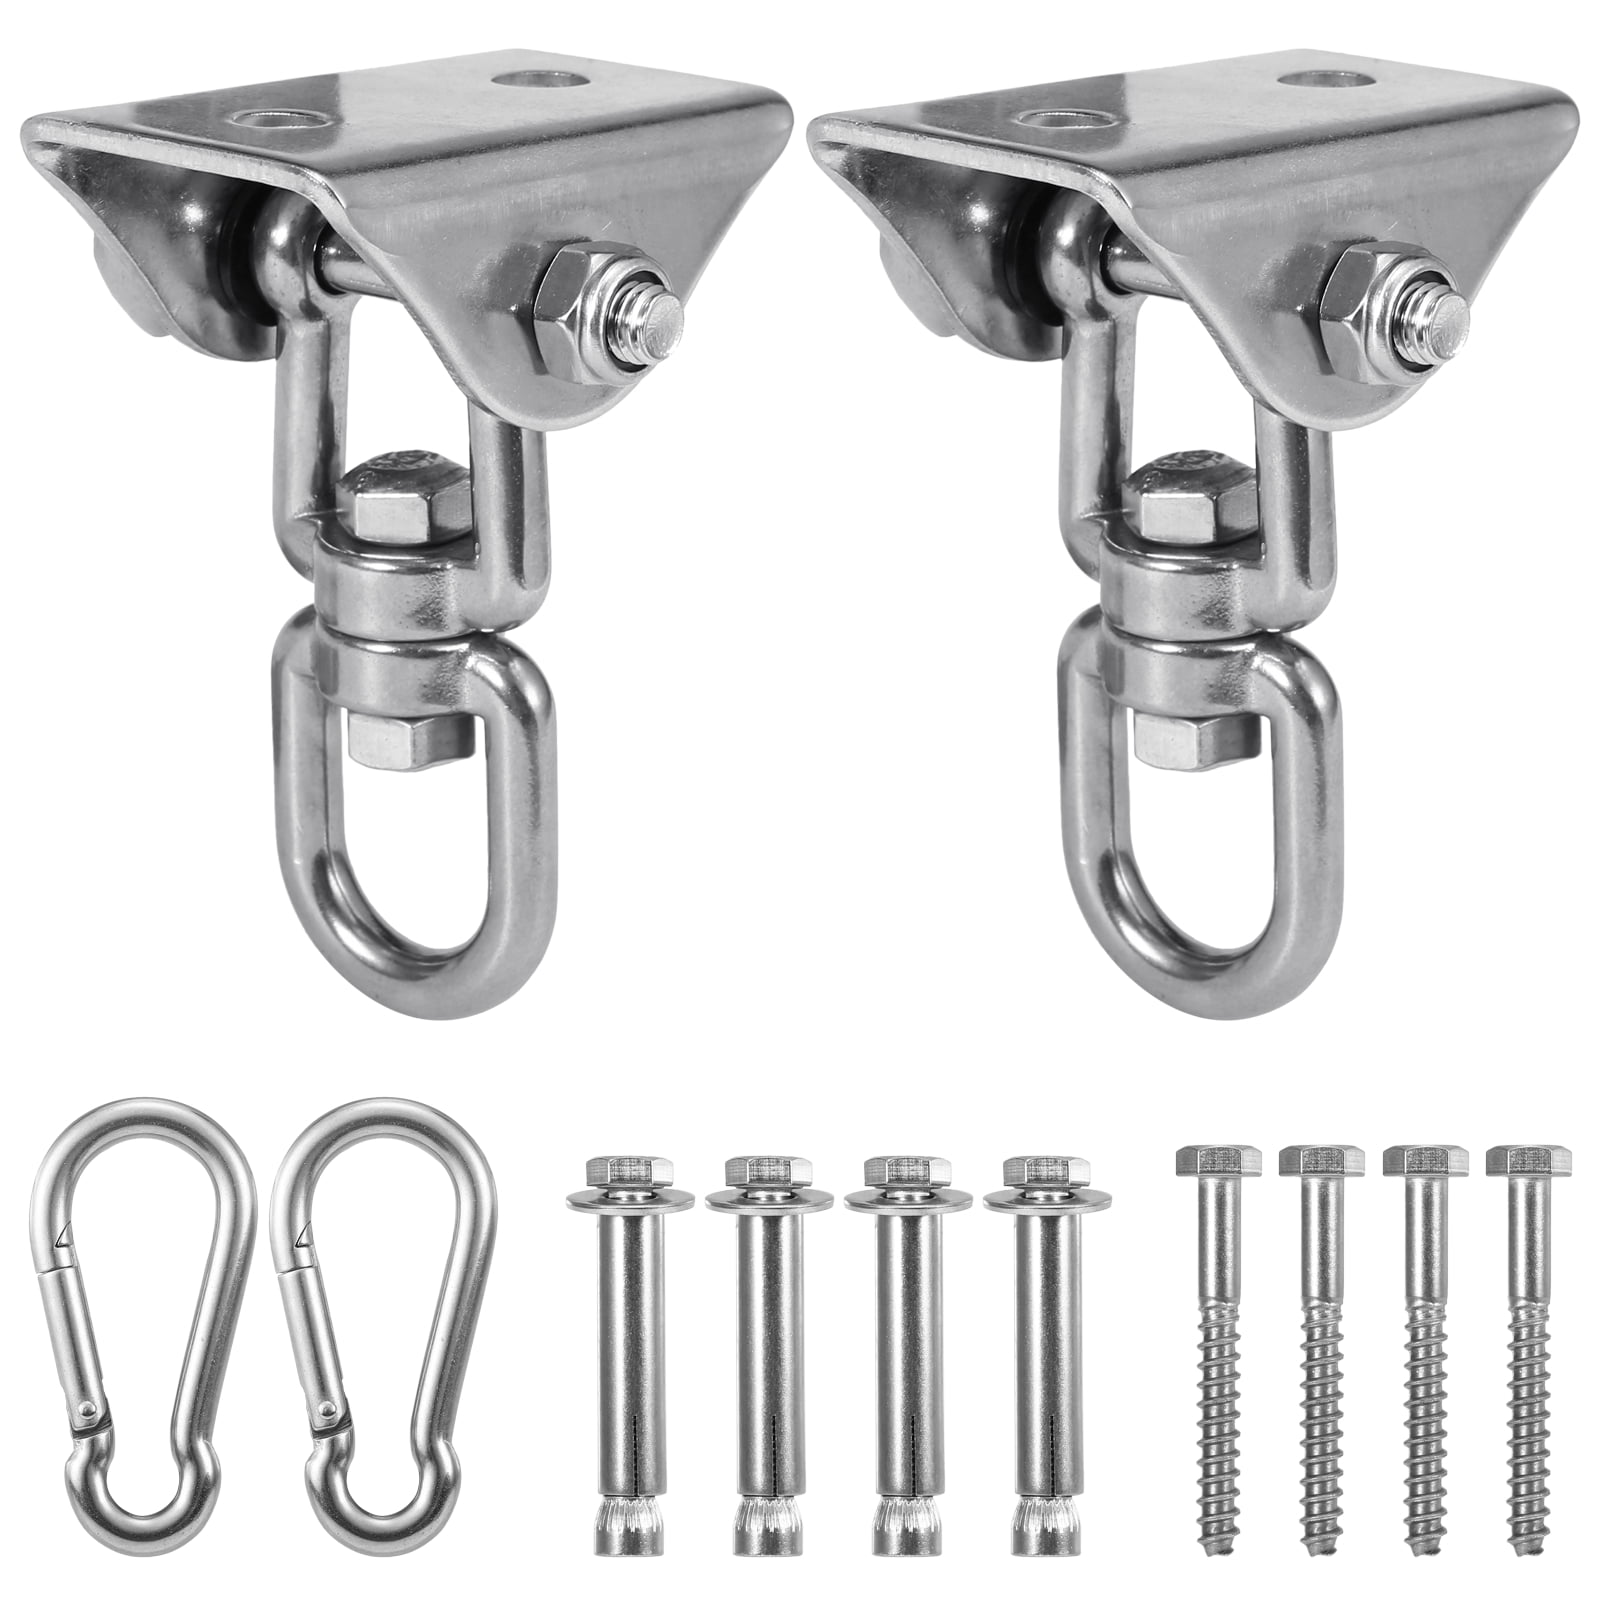 Style1 x 1 Pack Permanent Antirust Stainless Steel Suspension Hooks 360° Rotate for Wooden and Concrete Swing Set Playground Porch Yoga Hammock Chair Heavy Duty Swing Hangers Set